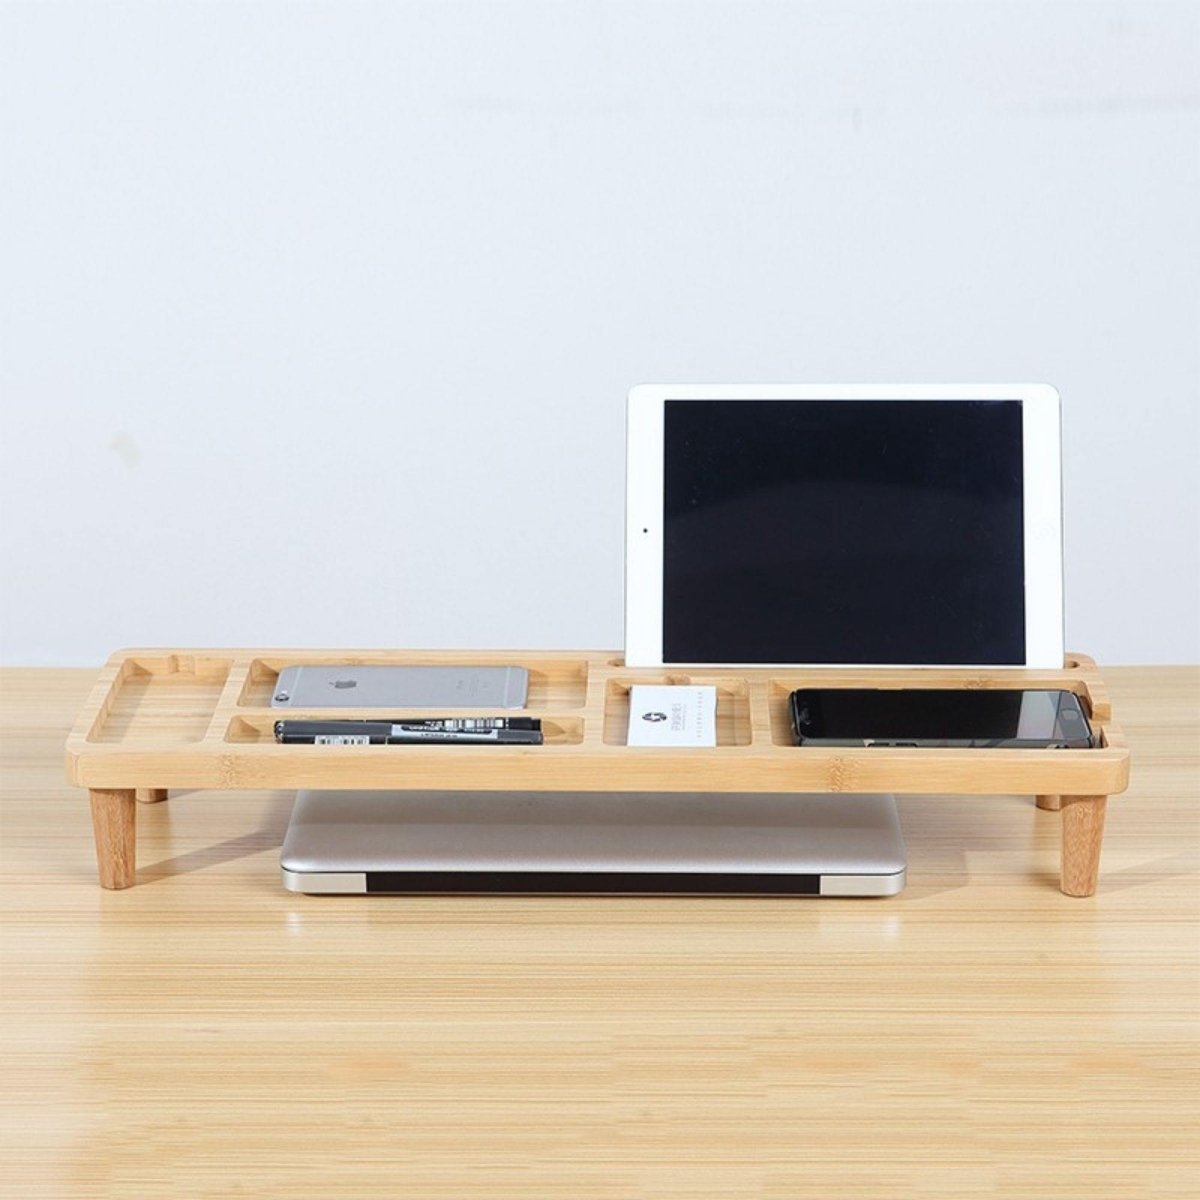 Bamboo Stand Organizer for Desk - iWoodStore